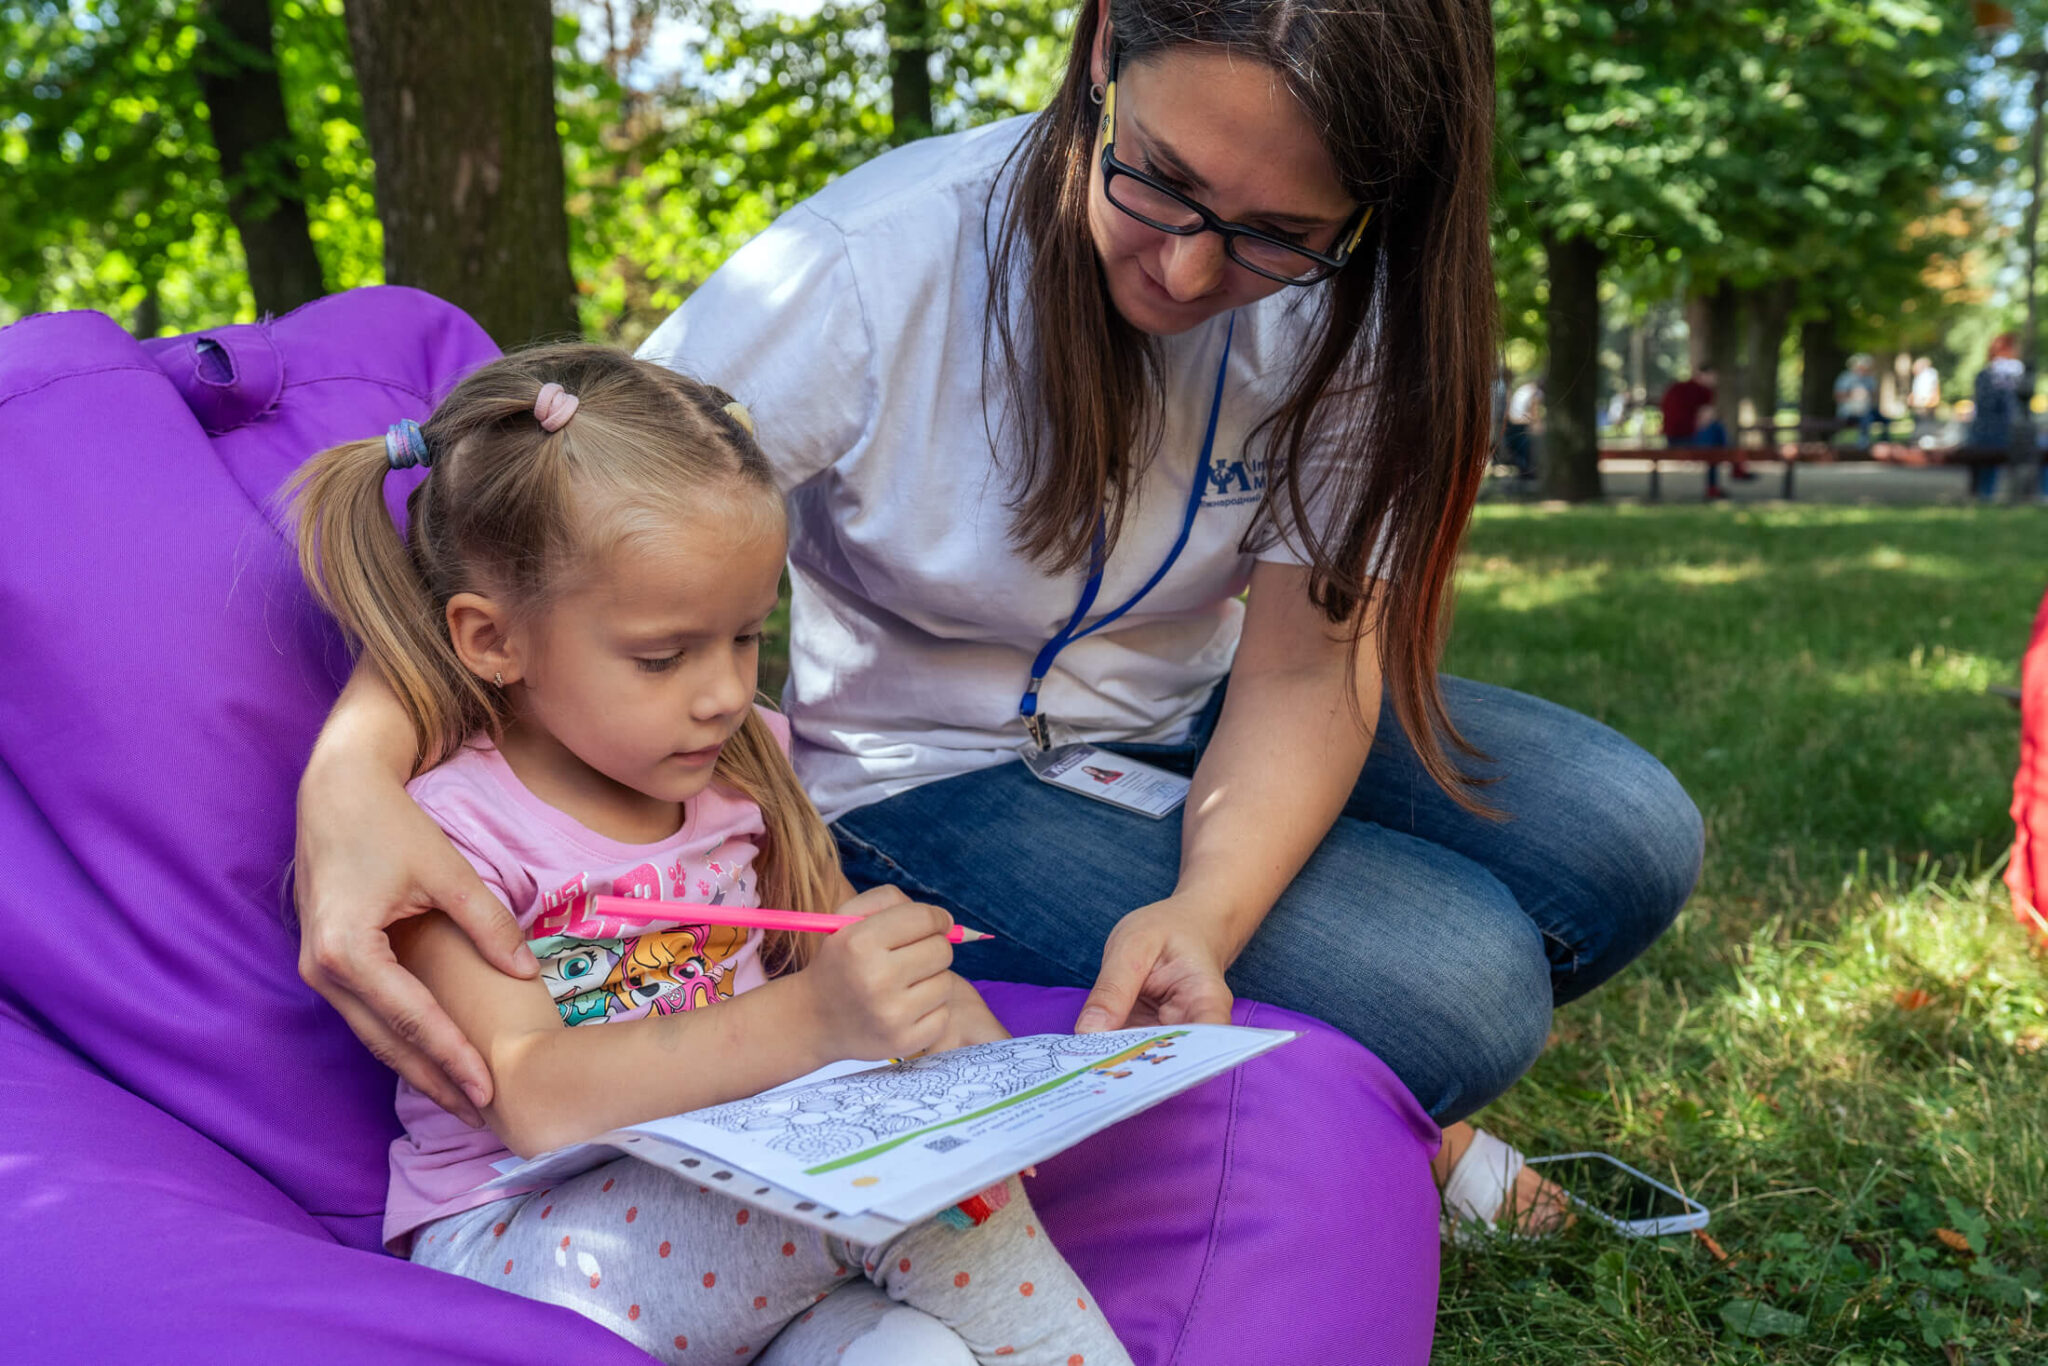 International Medical Corps held a World Breastfeeding Week event at European Square Park in Vinnytsia, Ukraine. We provided individual and group counseling on infant and young-child feeding (IYCF) practices, presented a photo exhibition and distributed educational materials to participants.